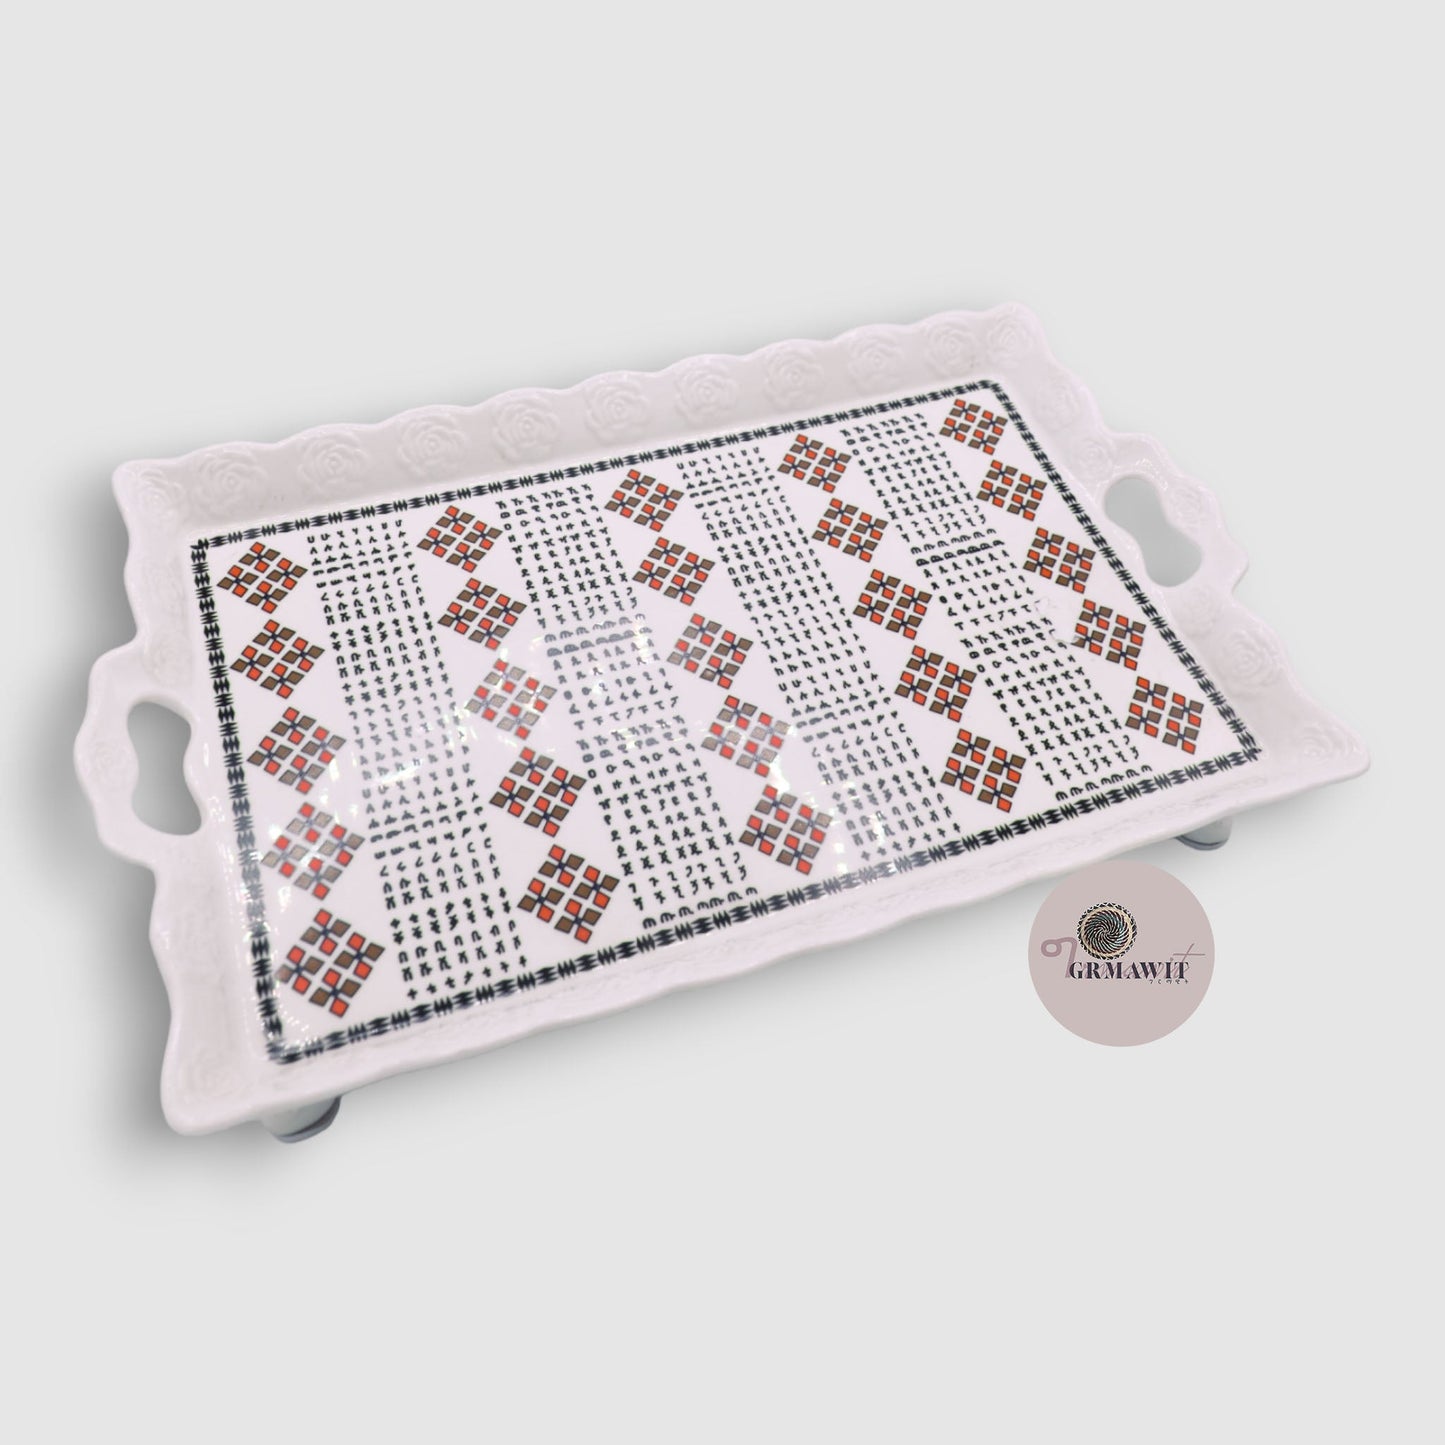 Traditional Ceramic Serving Tray | Alphabets Extras Grmawit 